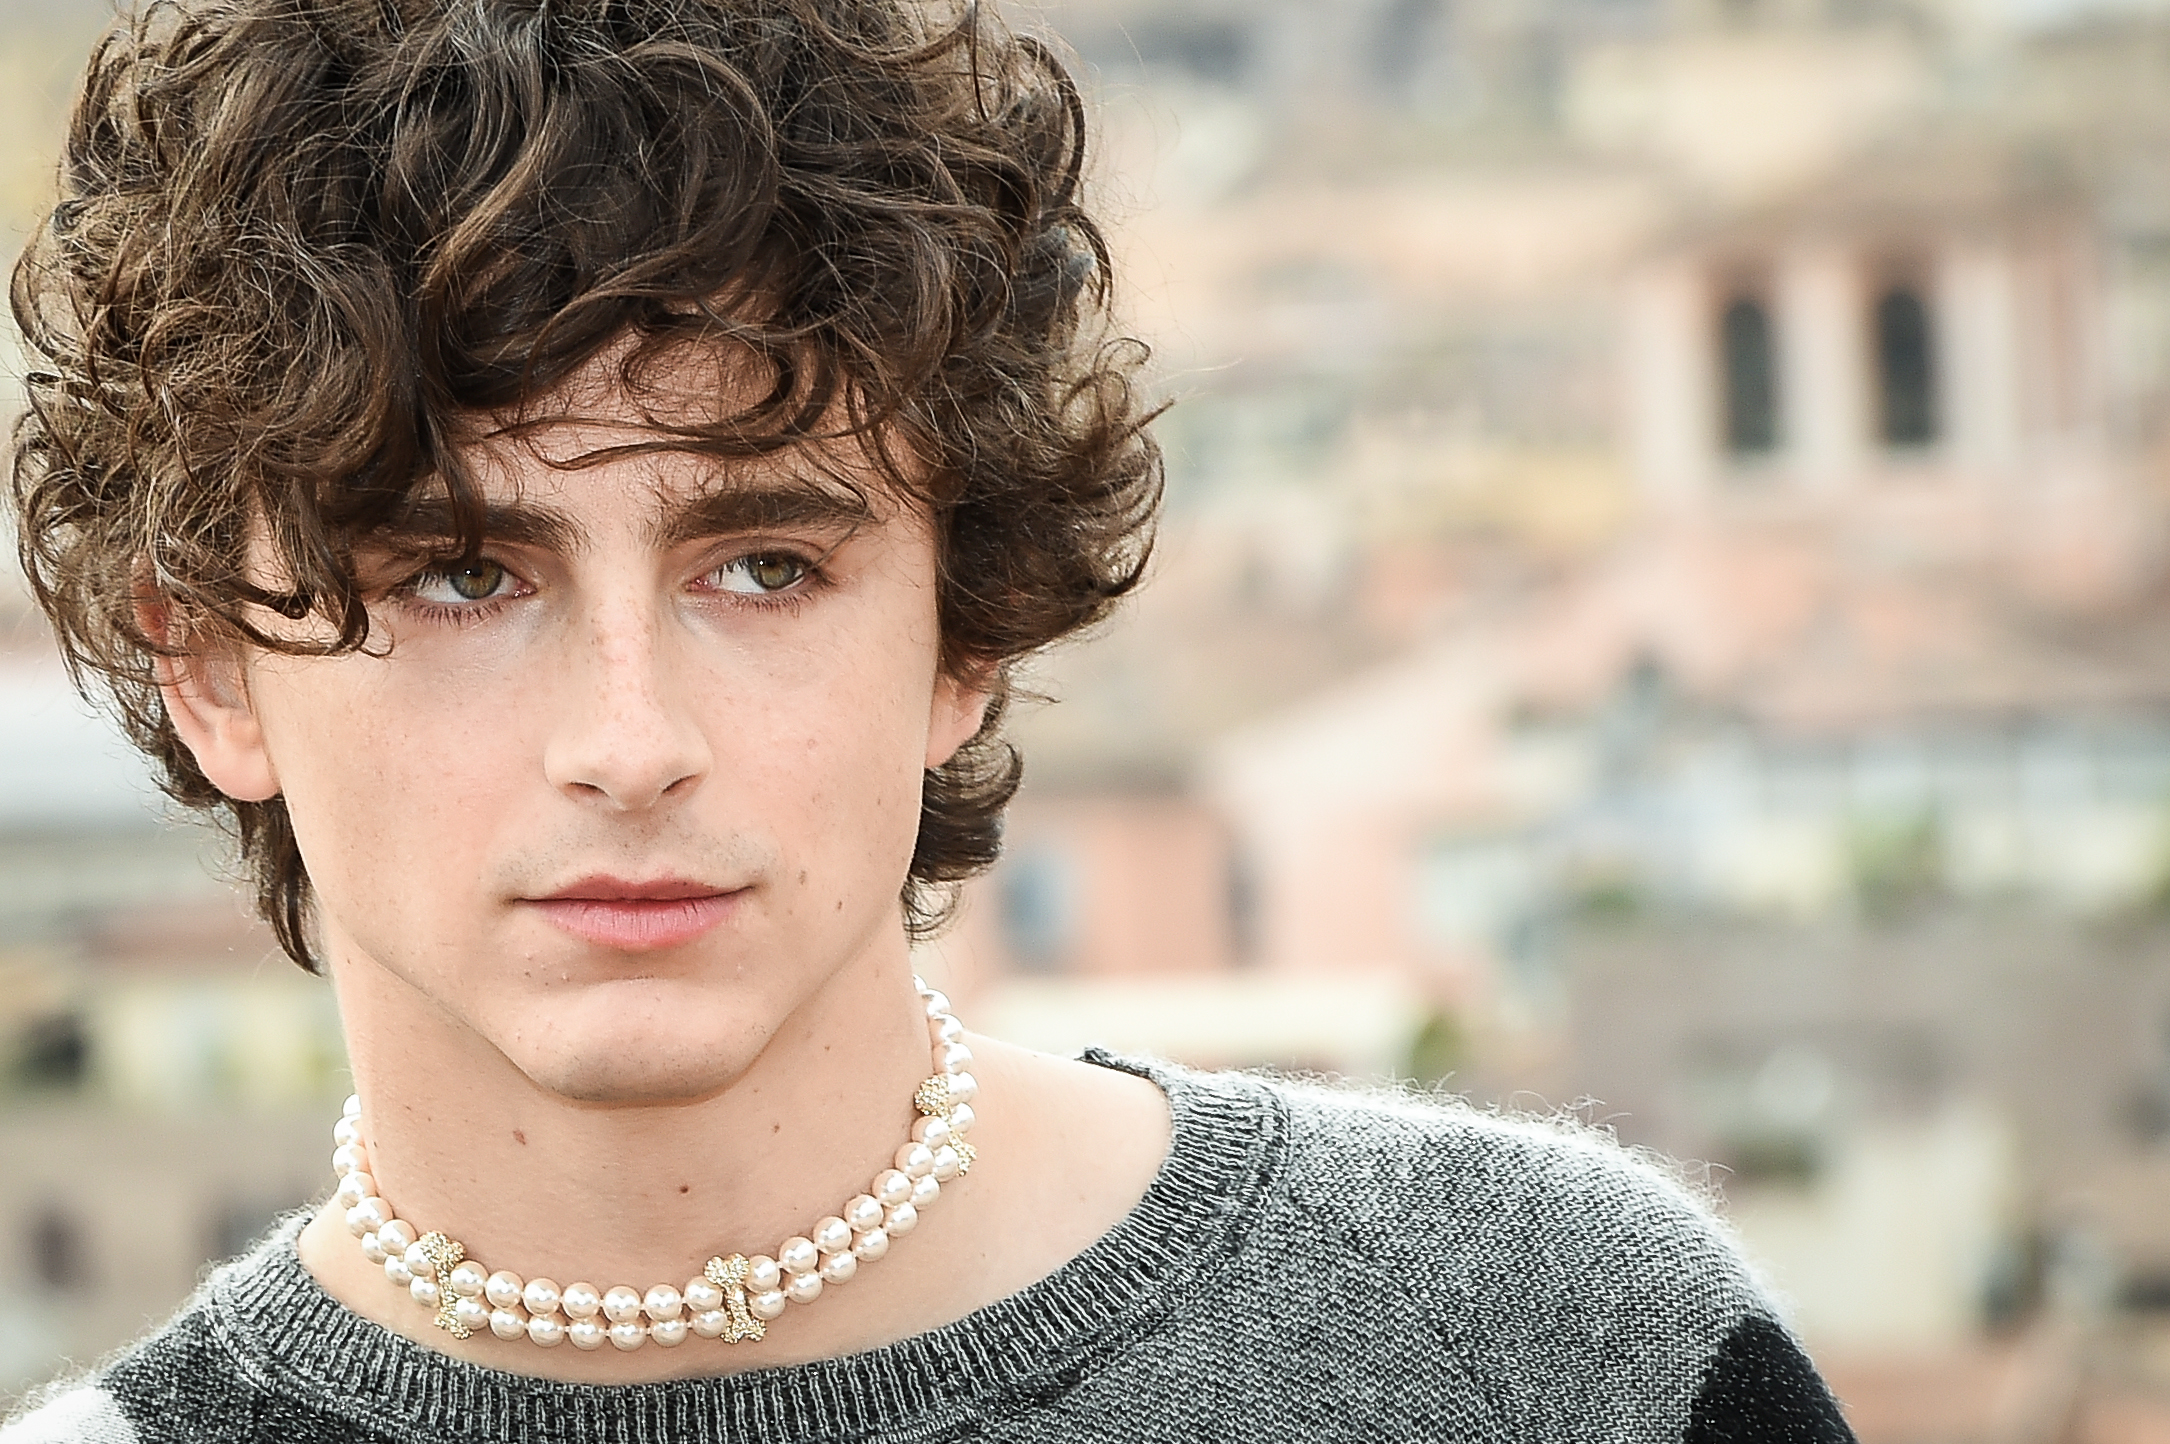 Happy 27th birthday, Timothee Chalamet! See the actor's best and most playful style moments